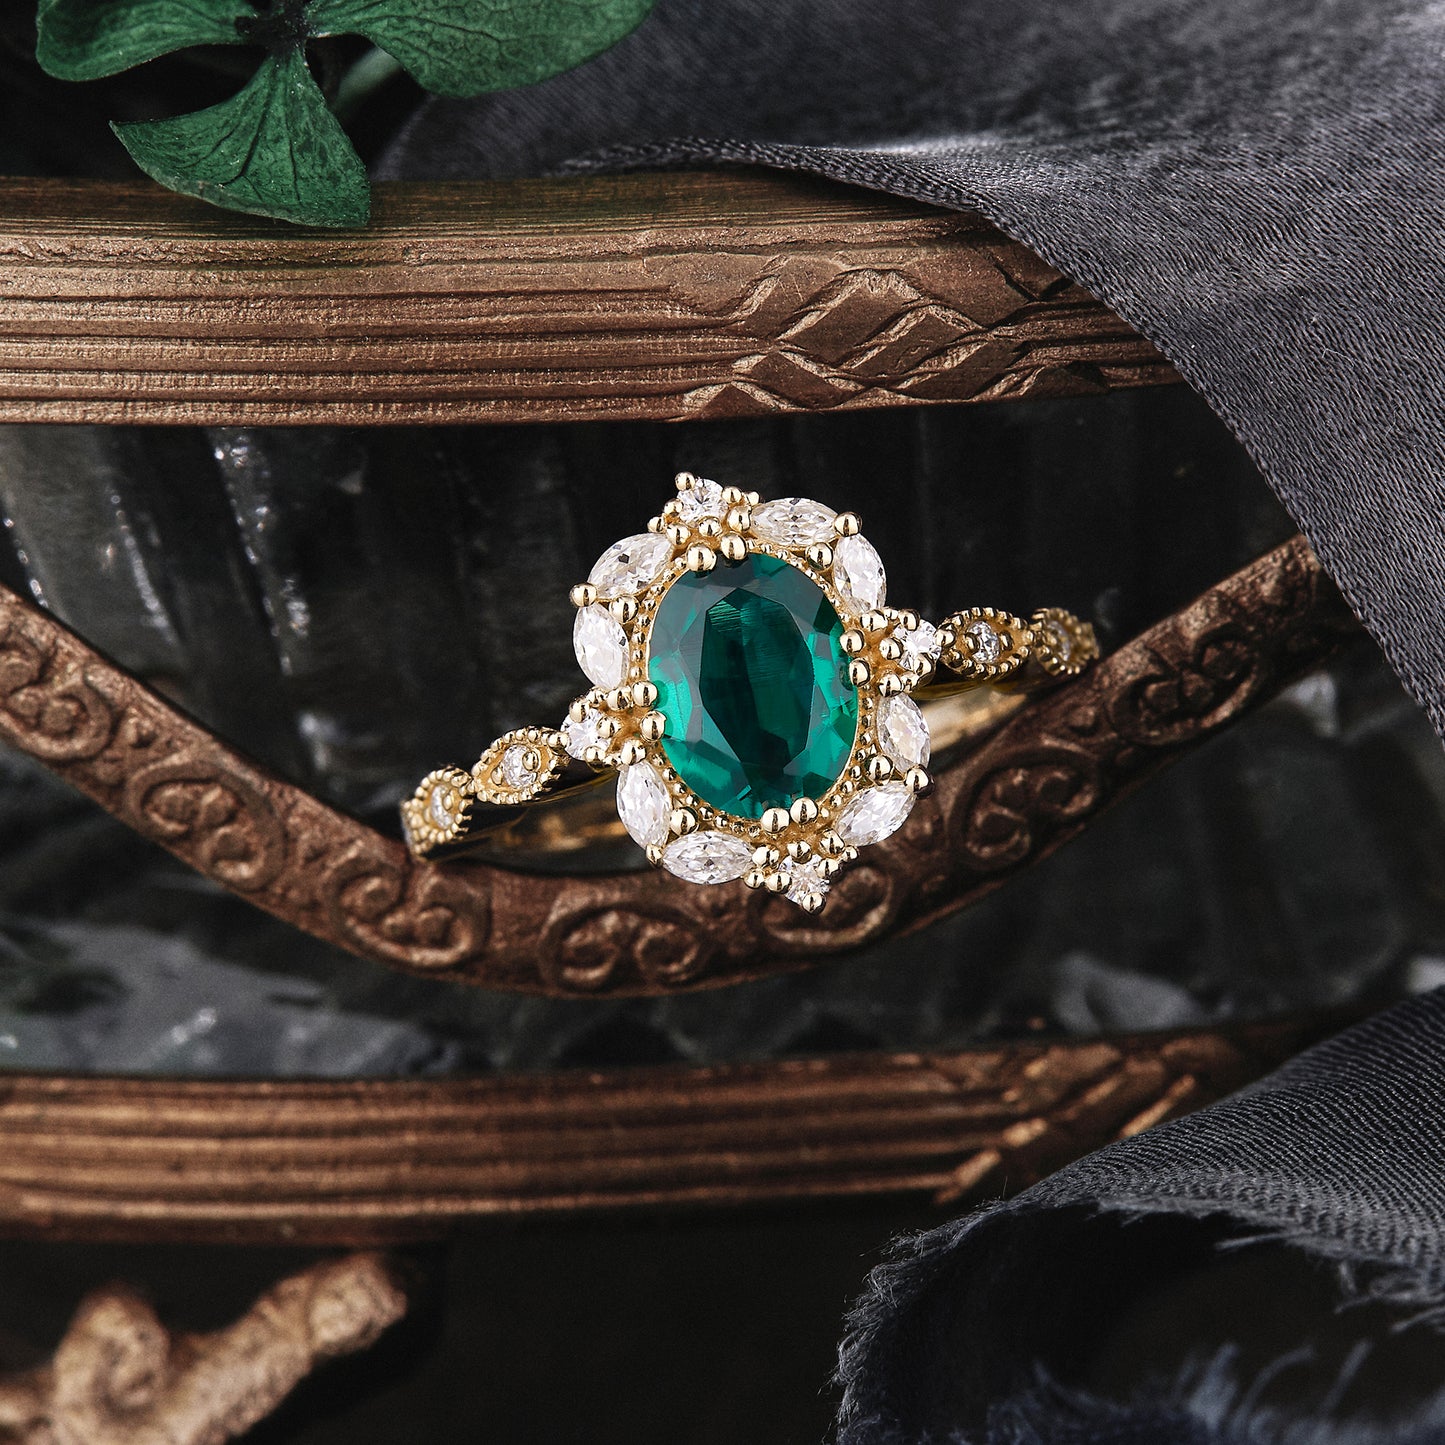 Green Gemstone Rings – Give Yourself the Green Light